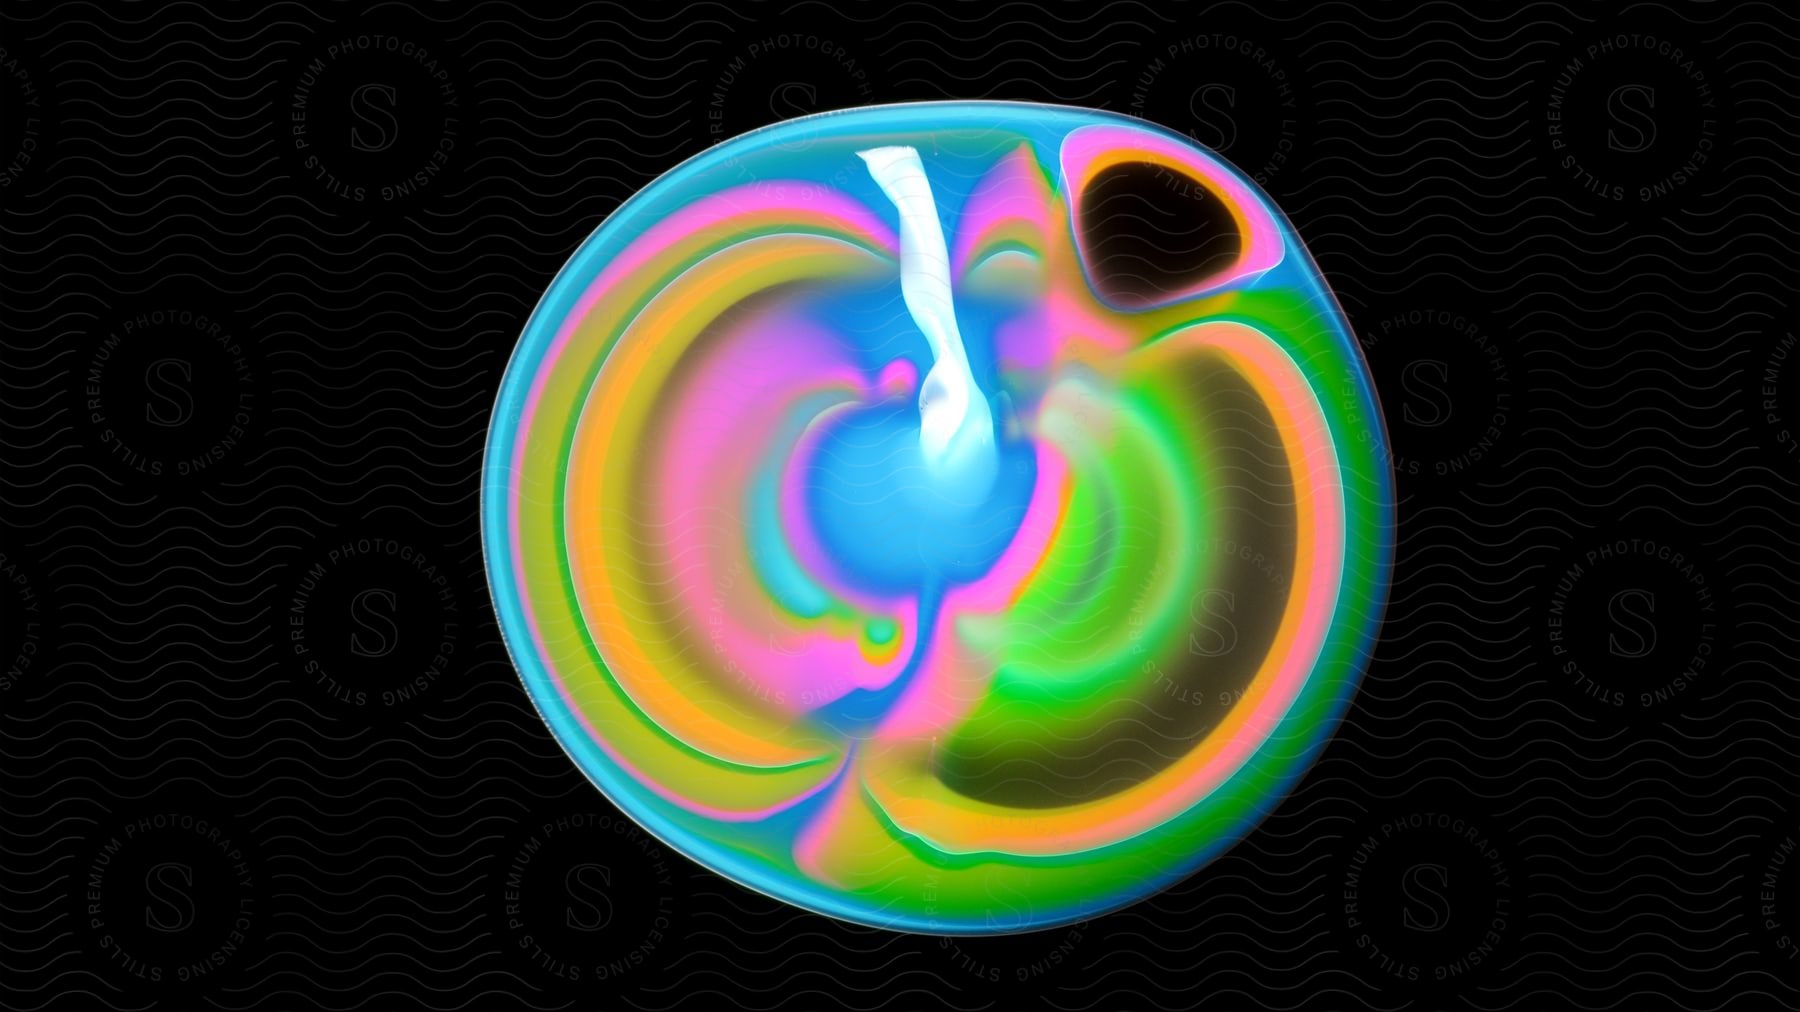 Abstract digital art of a colorful swirl on a black background.